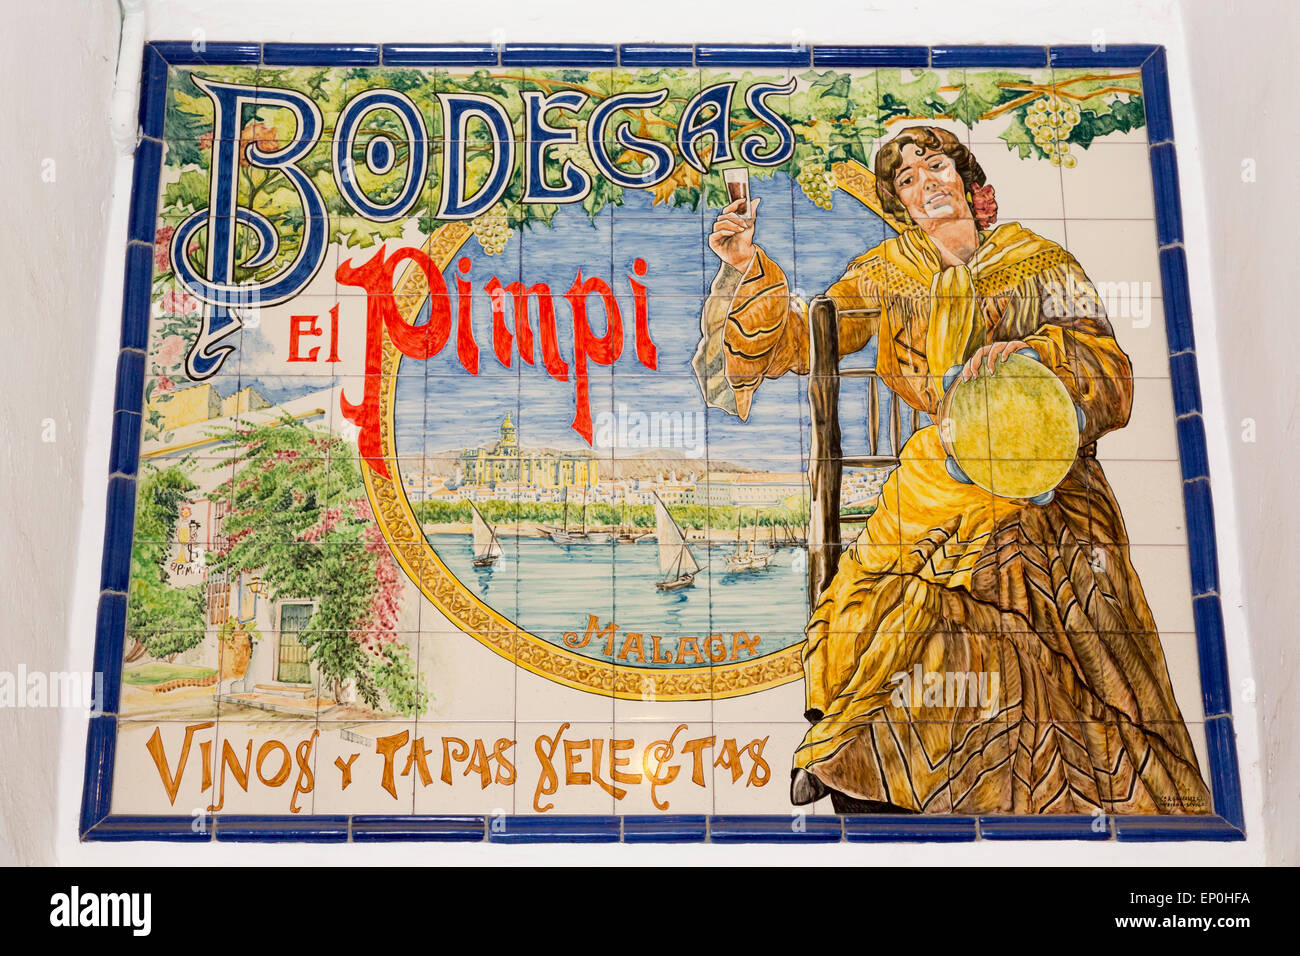 Ceramic tile painting advertising the typical bar-cafe, Bodegas El Pimpi in Calle Granada, Malaga, Malaga Province, Andalusia, s Stock Photo